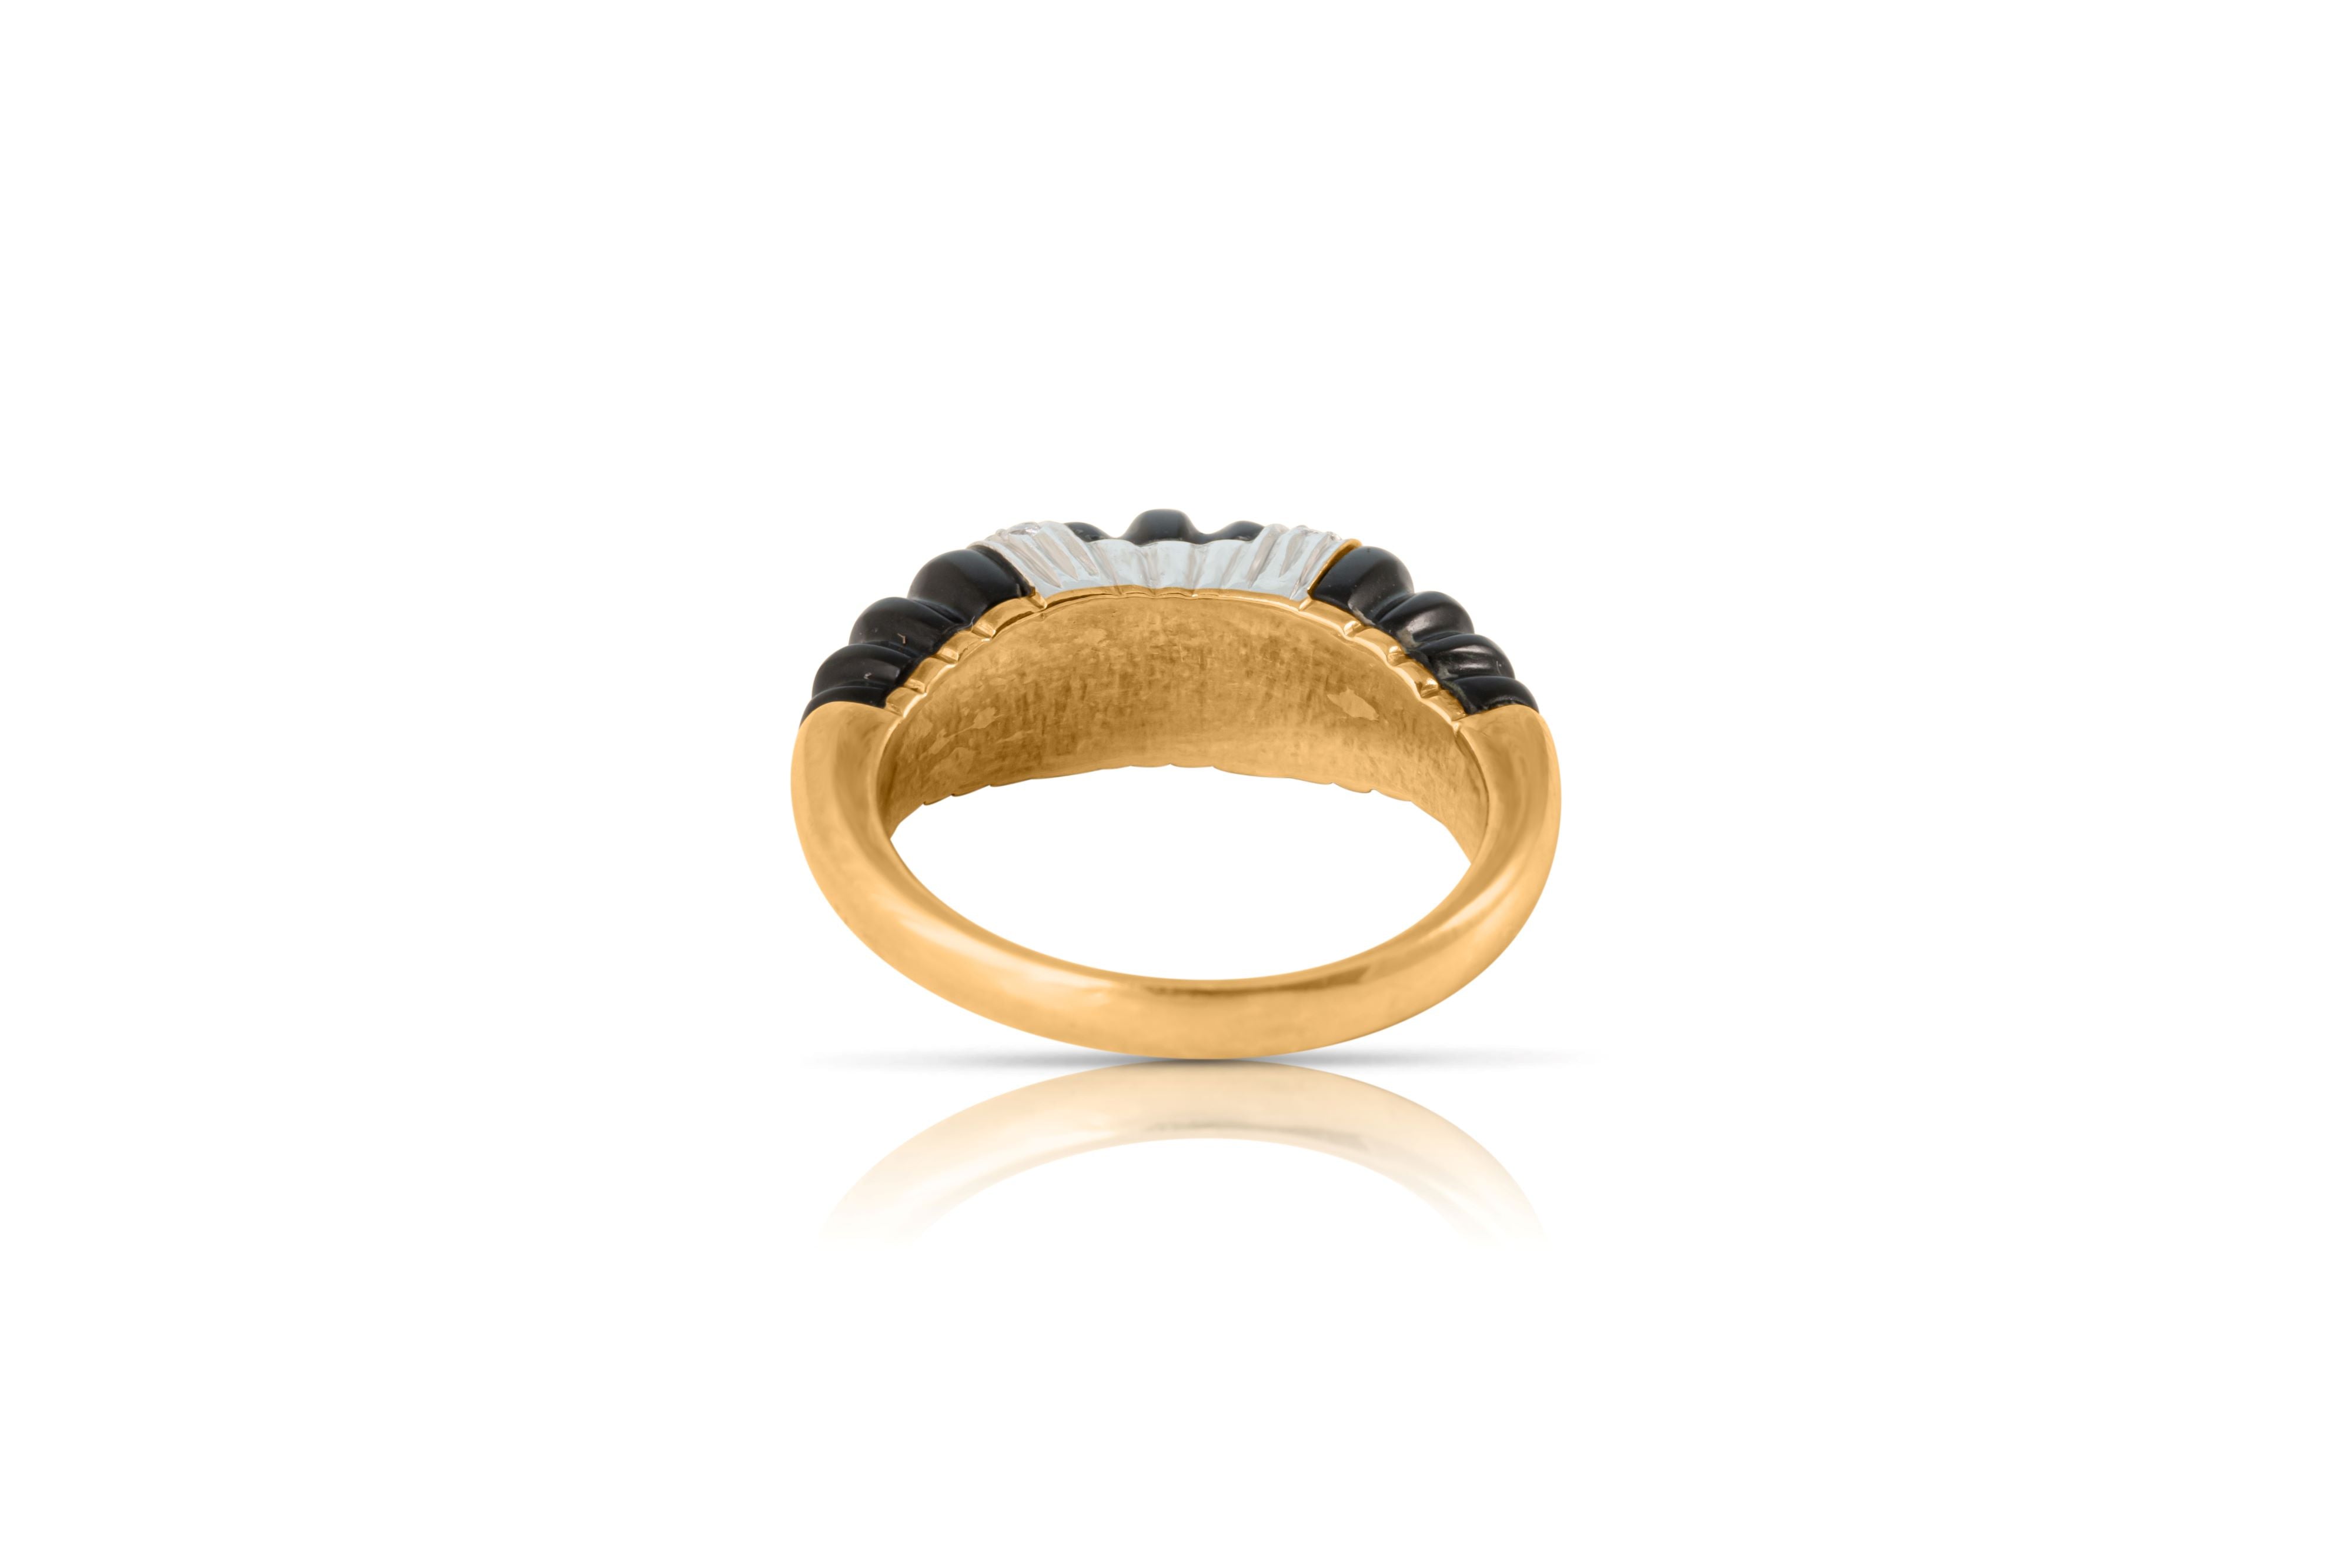 Back view of vintage 14ct gold dome ring with black onyx.